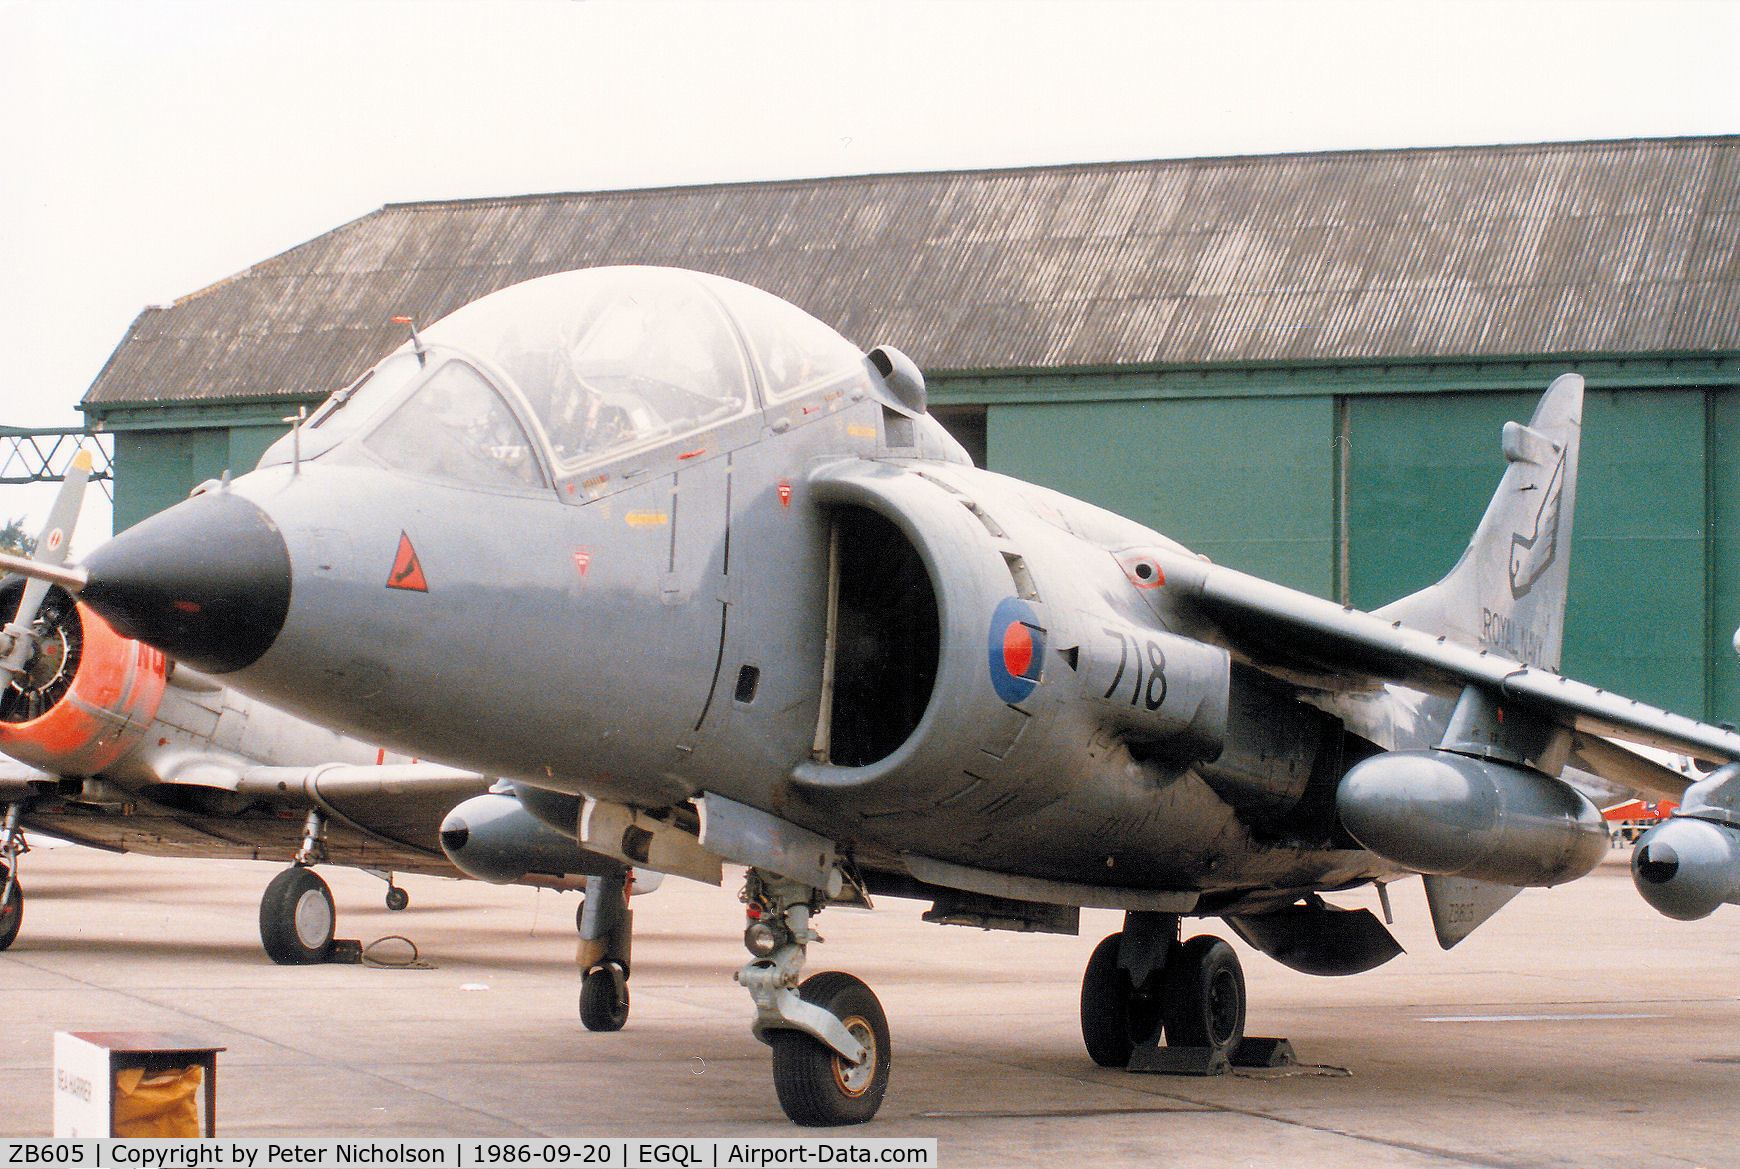 ZB605, 1983 Hawker Siddeley Harrier T.4N C/N 212037, Harrier T.4N of 899 Squadron at RNAS Yeovilton on display at the 1986 RAF Leuchars Airshow.